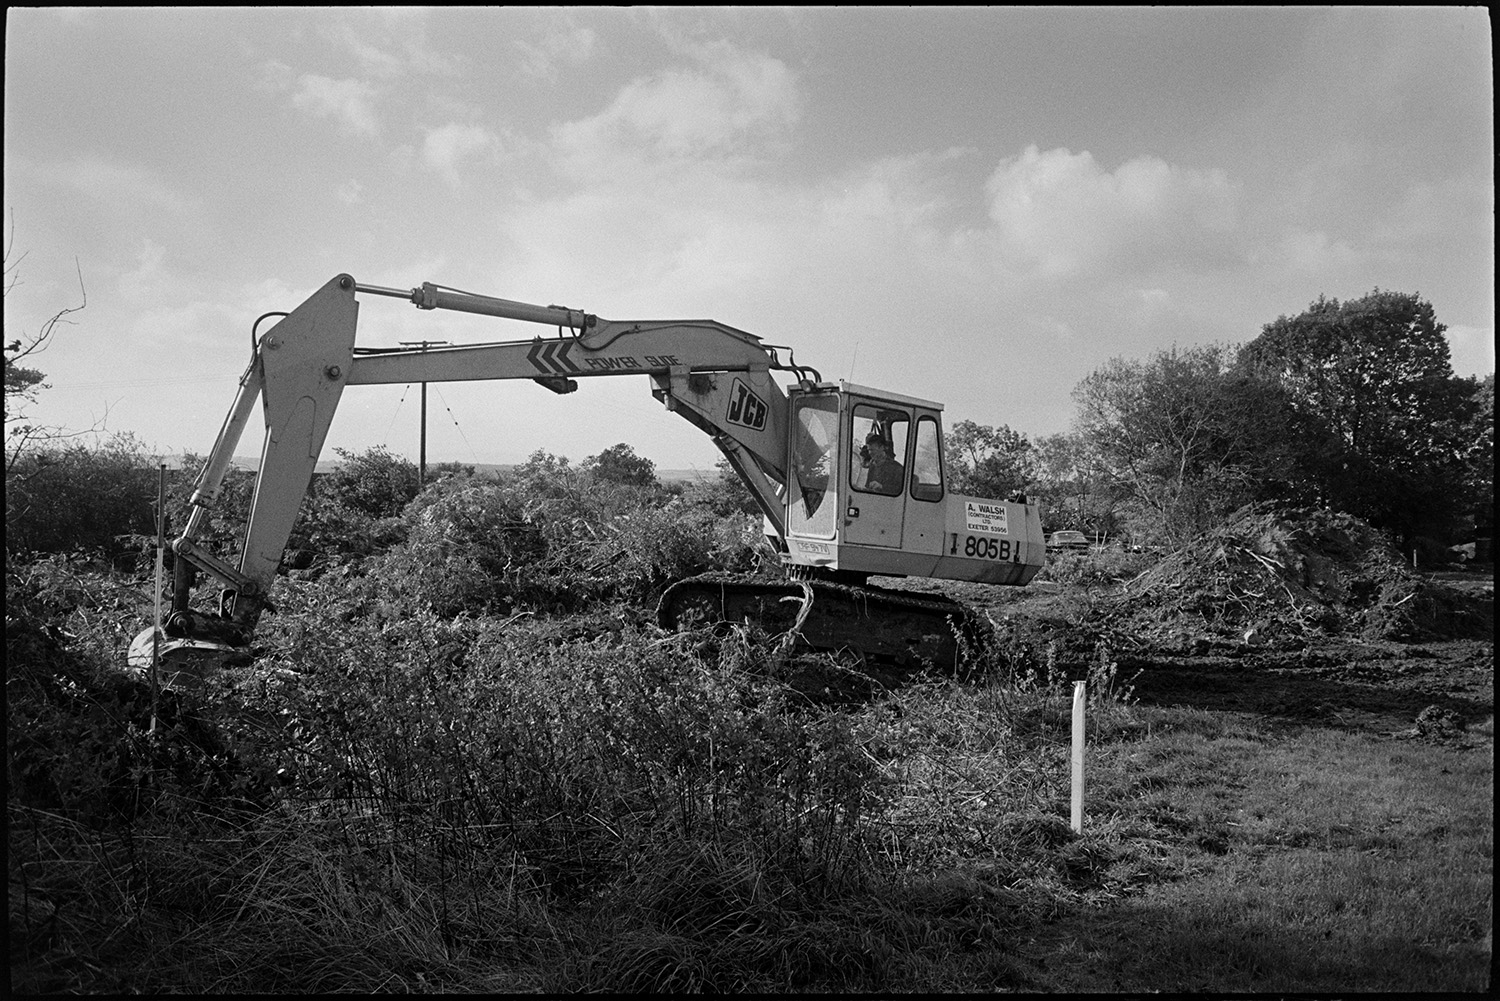 Builders starting work on site of new school, excavator and men drilling first hole on site.
[Contractors making a start on the site of the new primary school in Chulmleigh. A mechanical JCB digger is removing a hedge for the groundworks.]